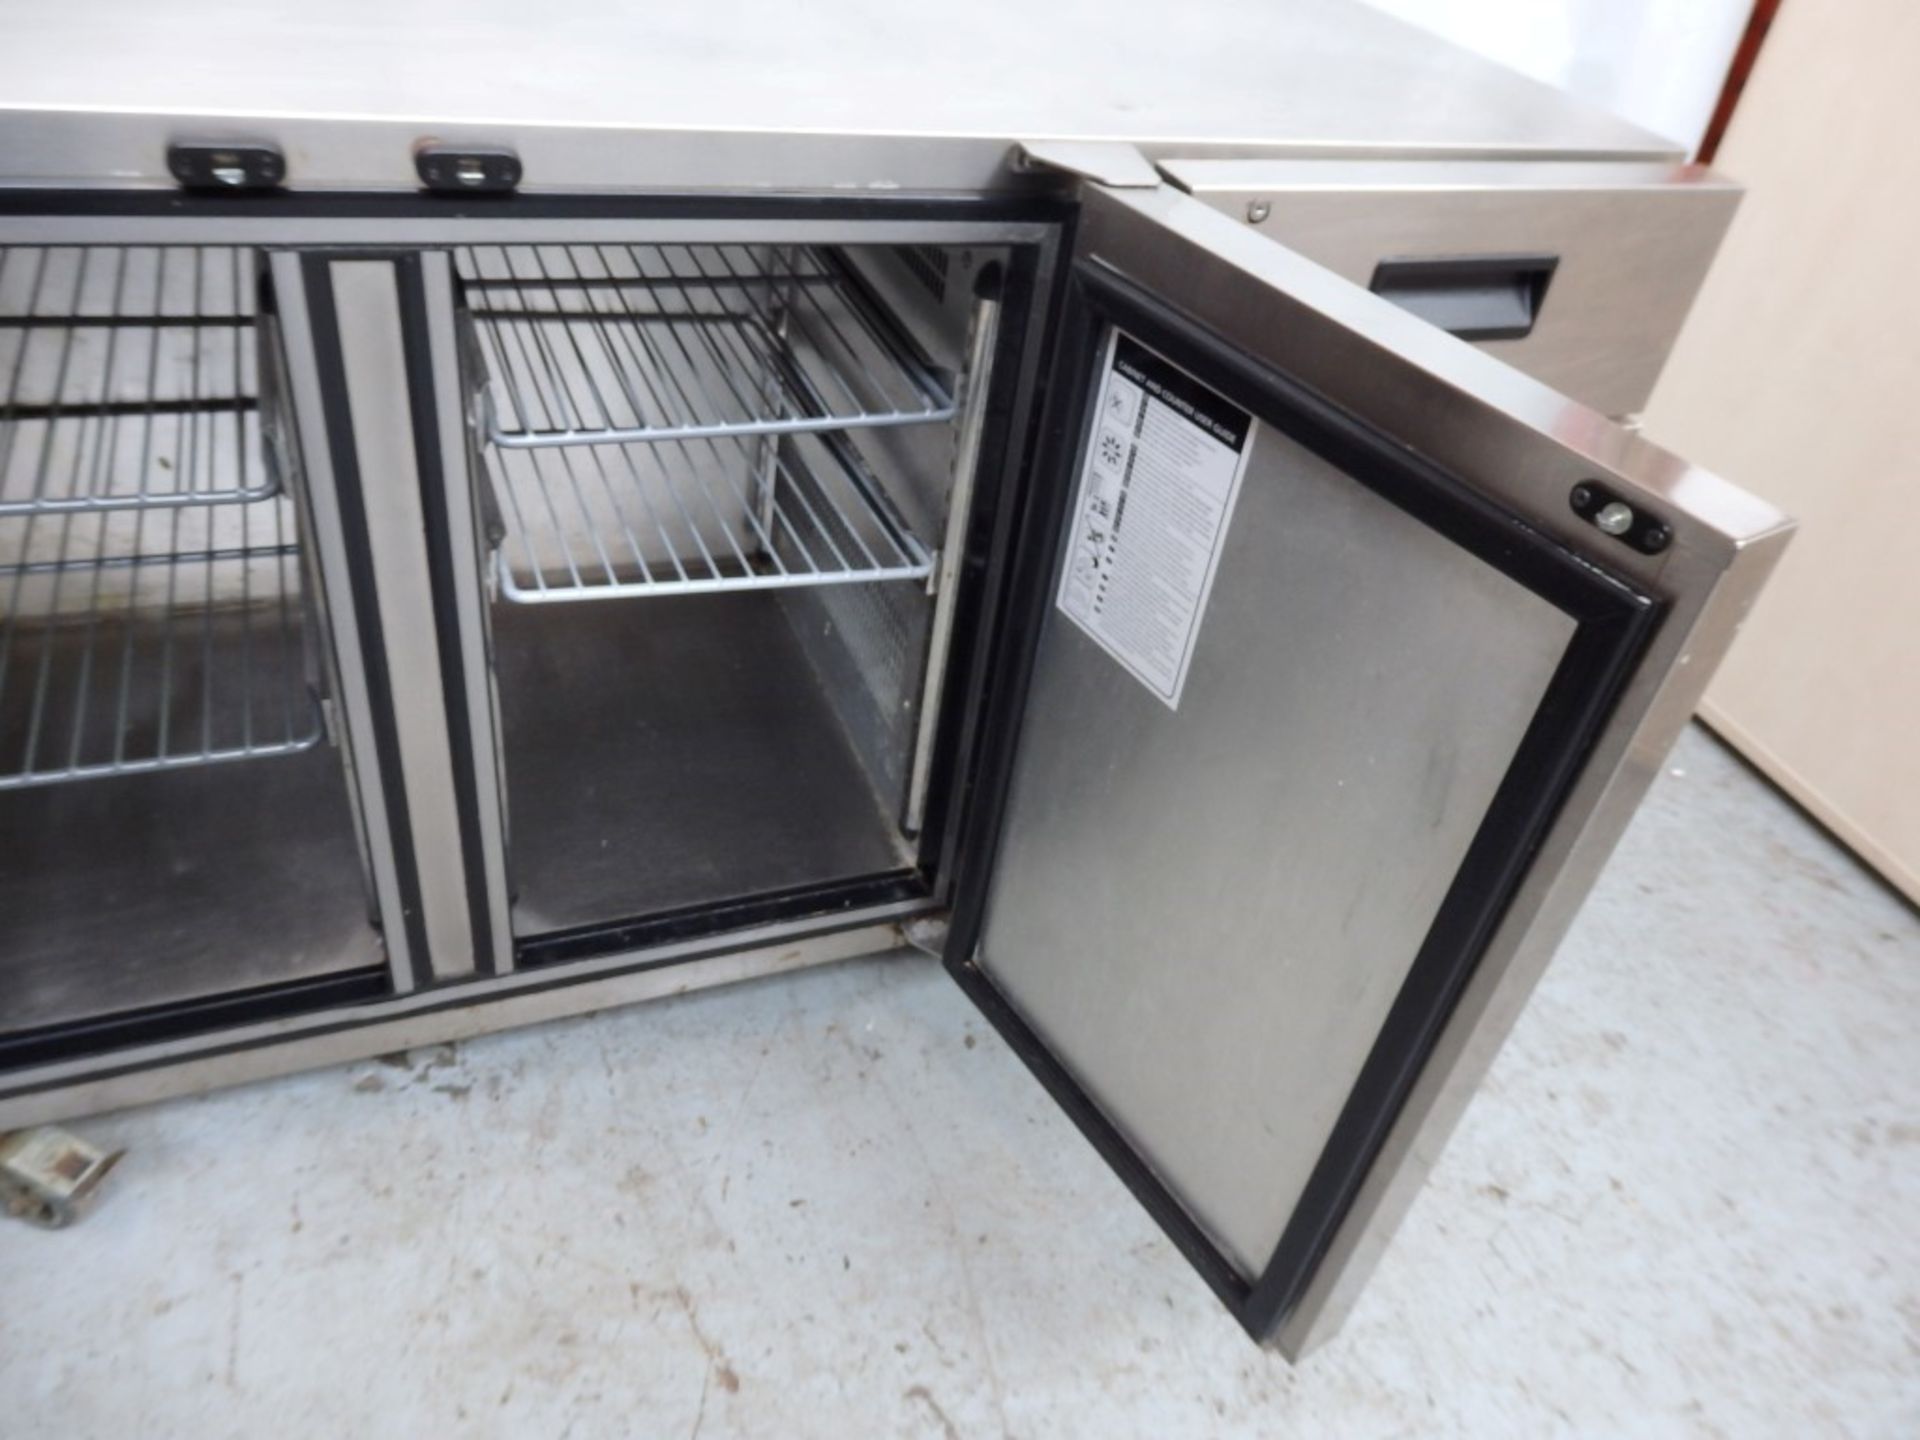 1 x FOSTER Commercial Undercounter Refrigerator With 2-Door Storage, Drawer And Stainless Steel - Image 6 of 14